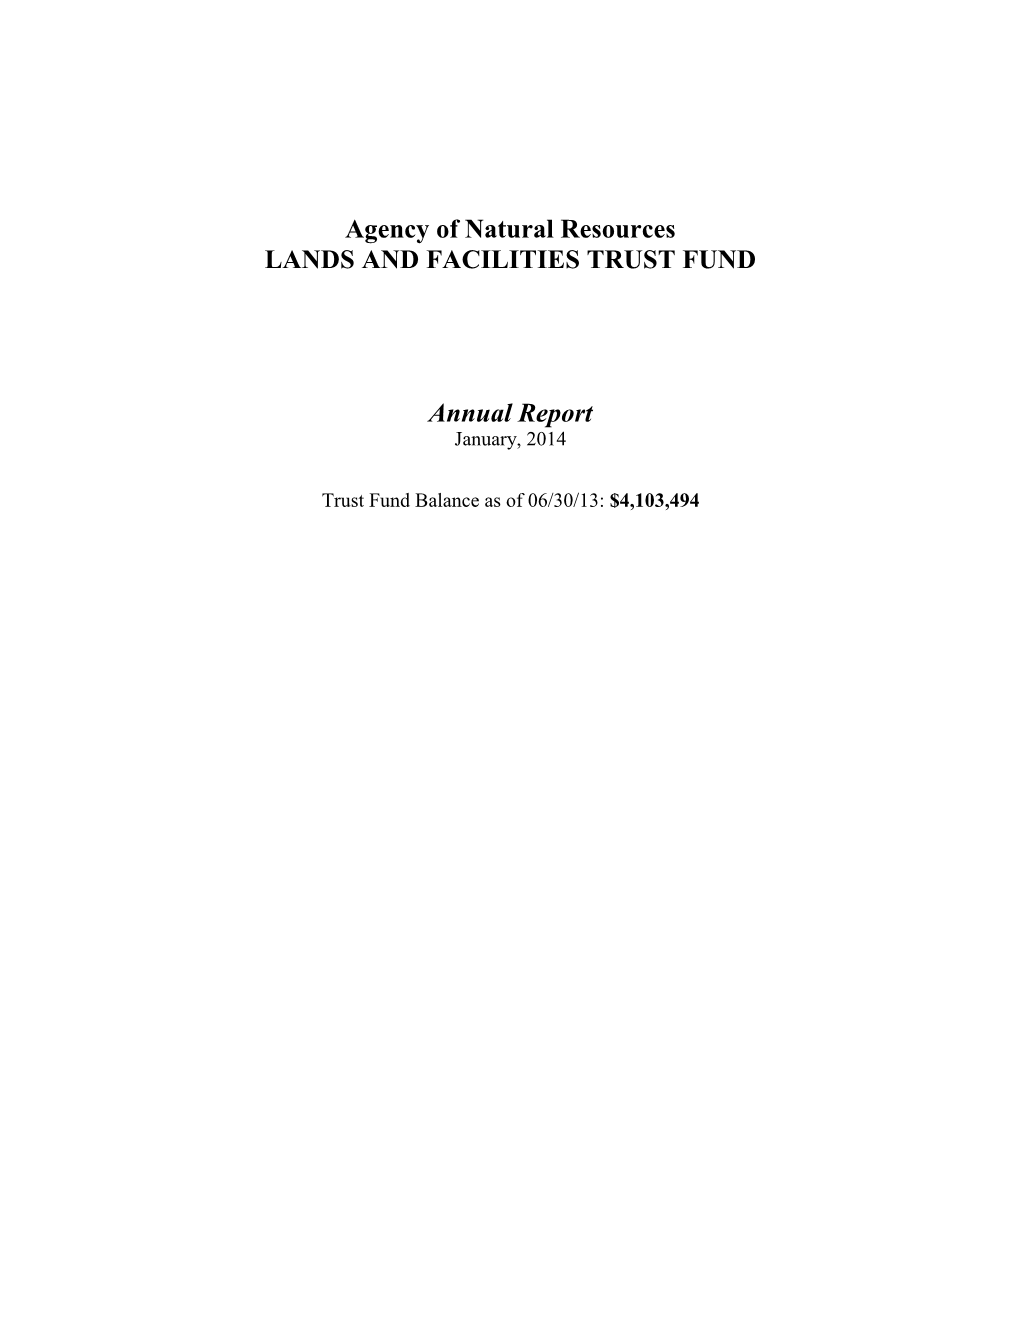 2014 Annual Report on the Lands and Facilities Trust Fund Represents the Twelfth Such Report